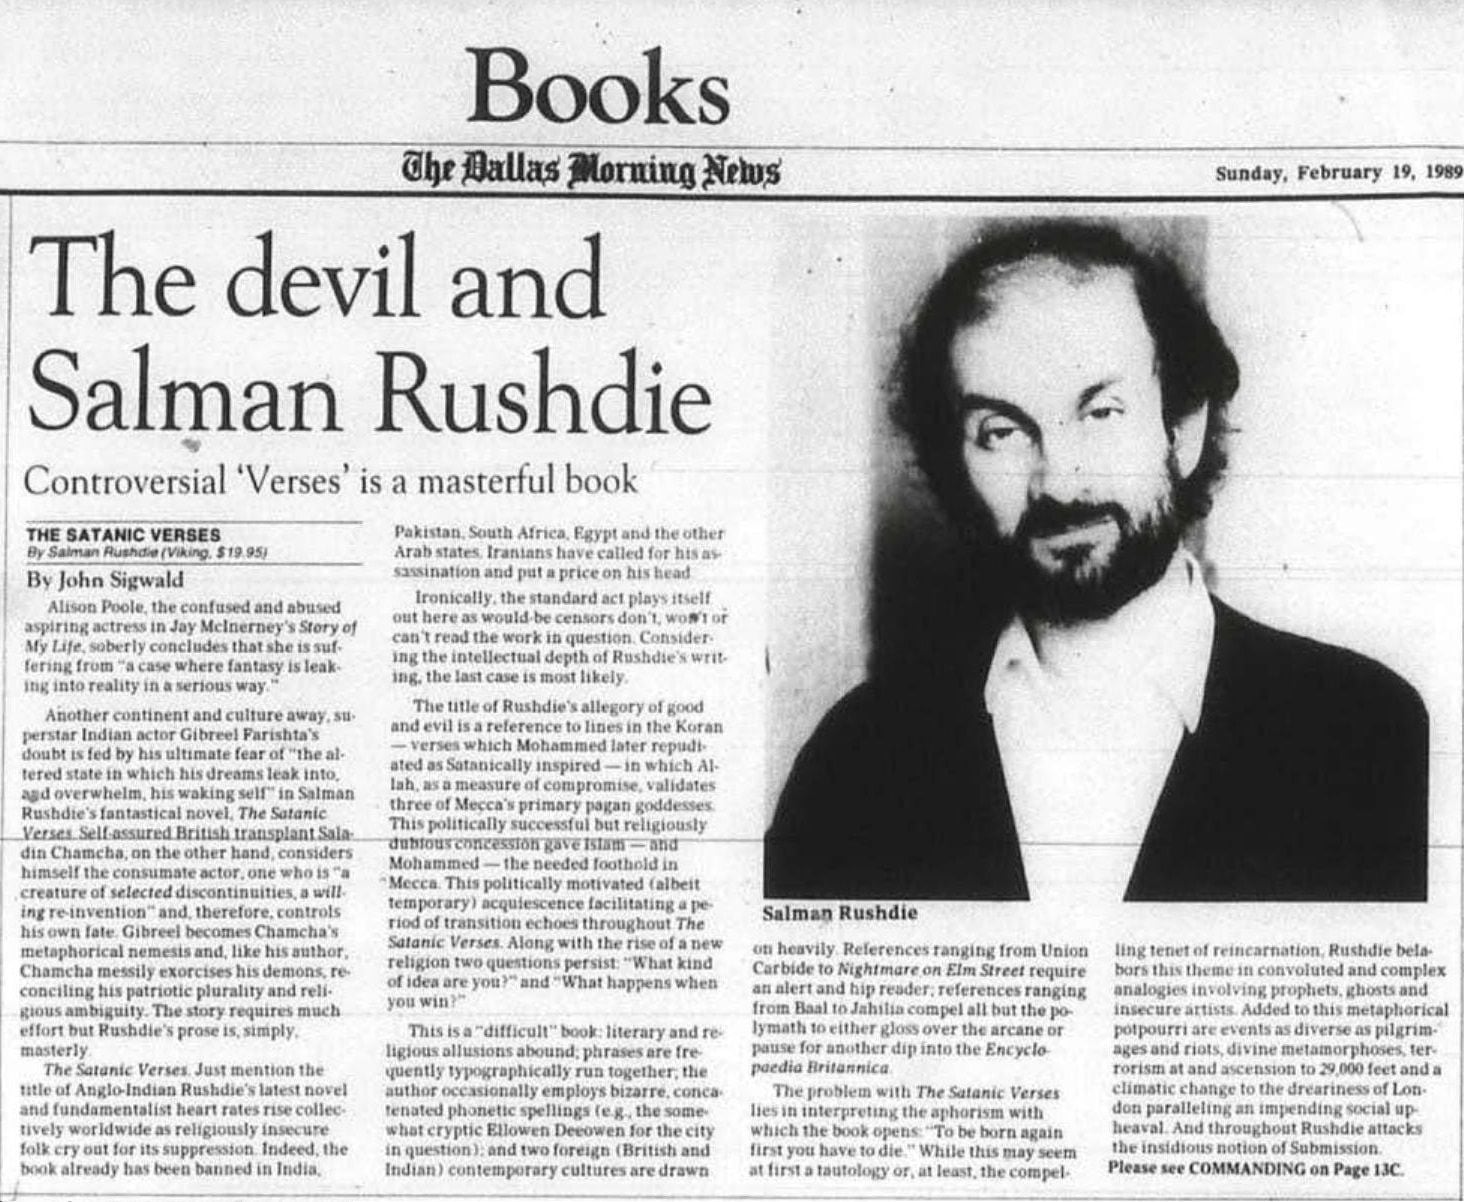 In a 1989 review from "The Dallas Morning News," contributor John Sigwald praised Salman...